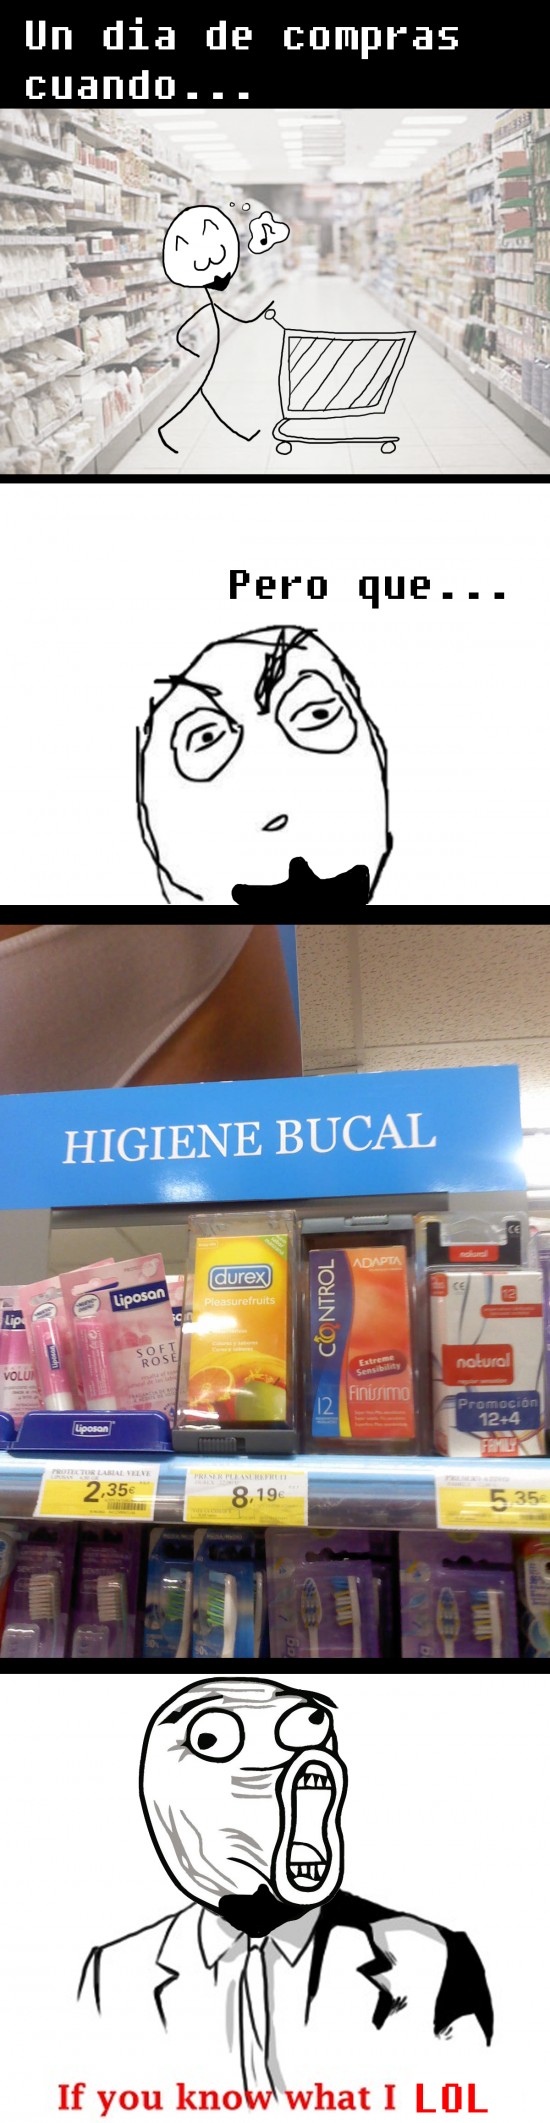 bucal,condones,Higiene,if you know what i mean,LOL,seccion,supermercado